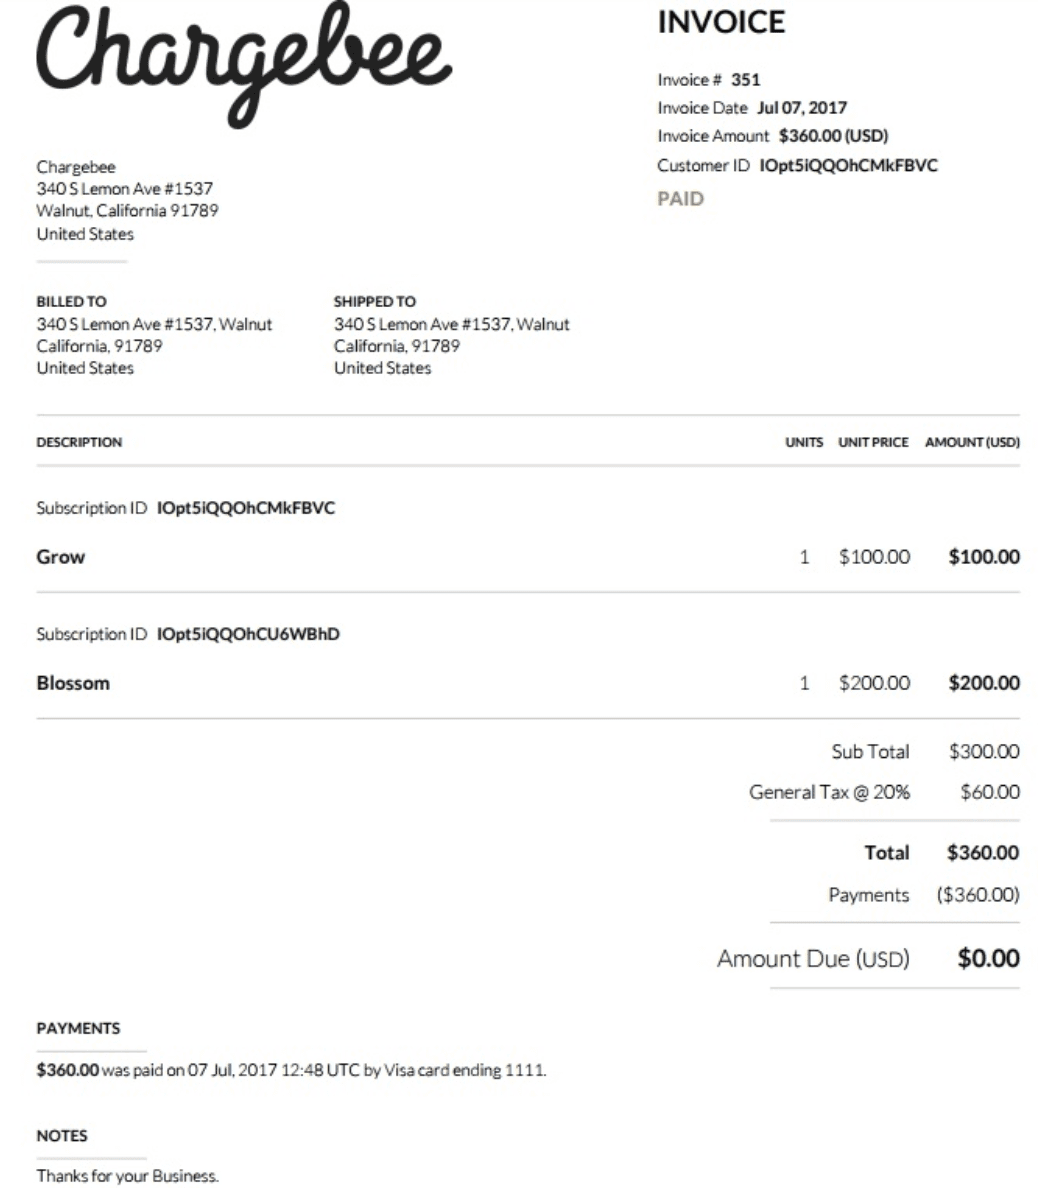 Chargebee consolidated invoice